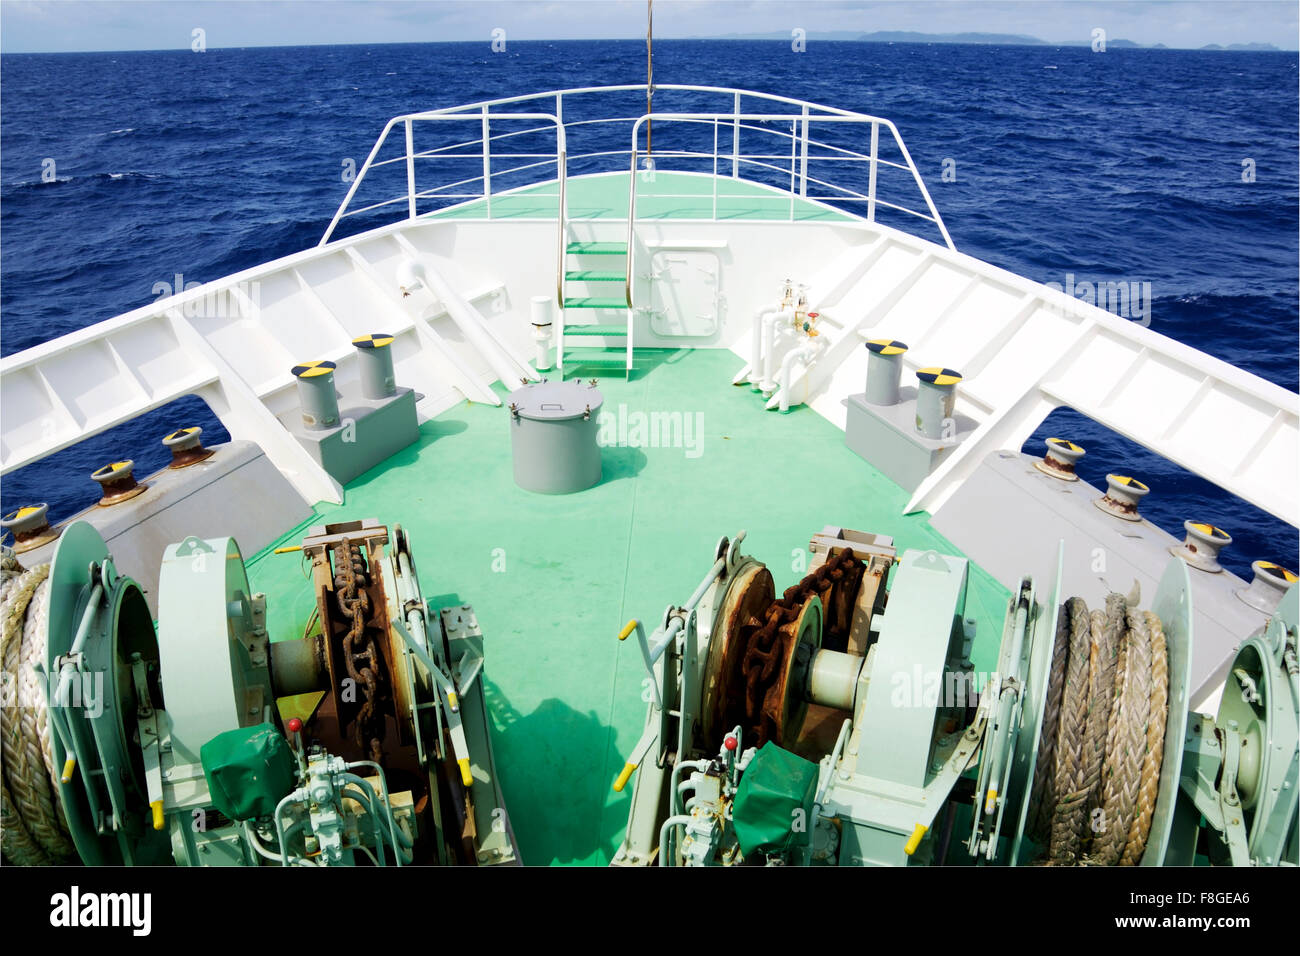 From the bow of a ship on the ocean Stock Photo